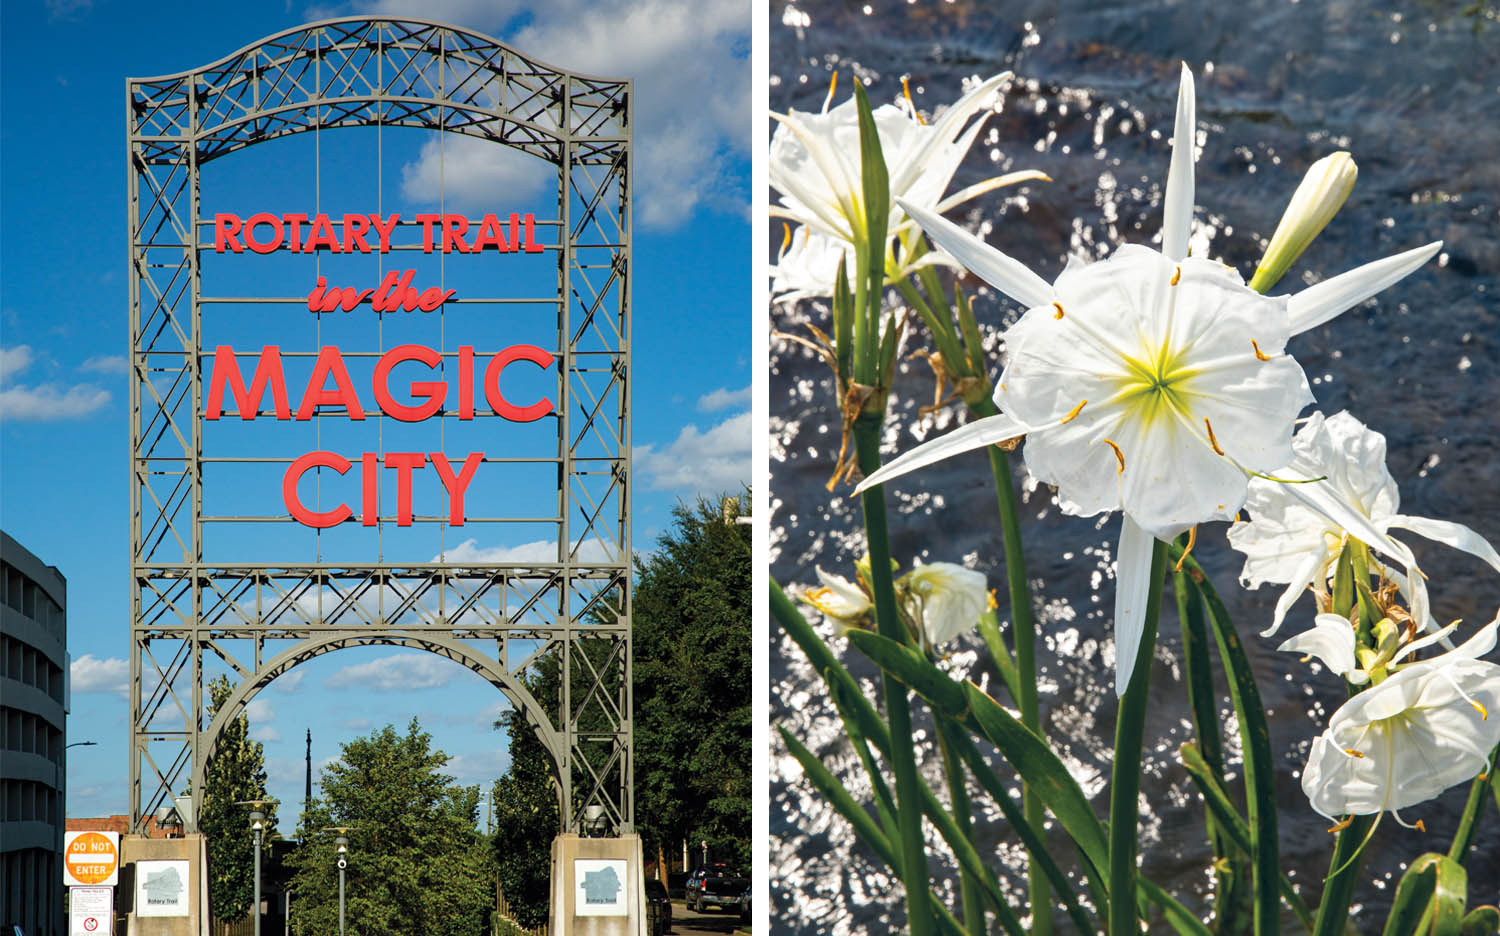 Side-by-side images of Birmingham's Rotary Trail sign and blooming Cahaba lilies